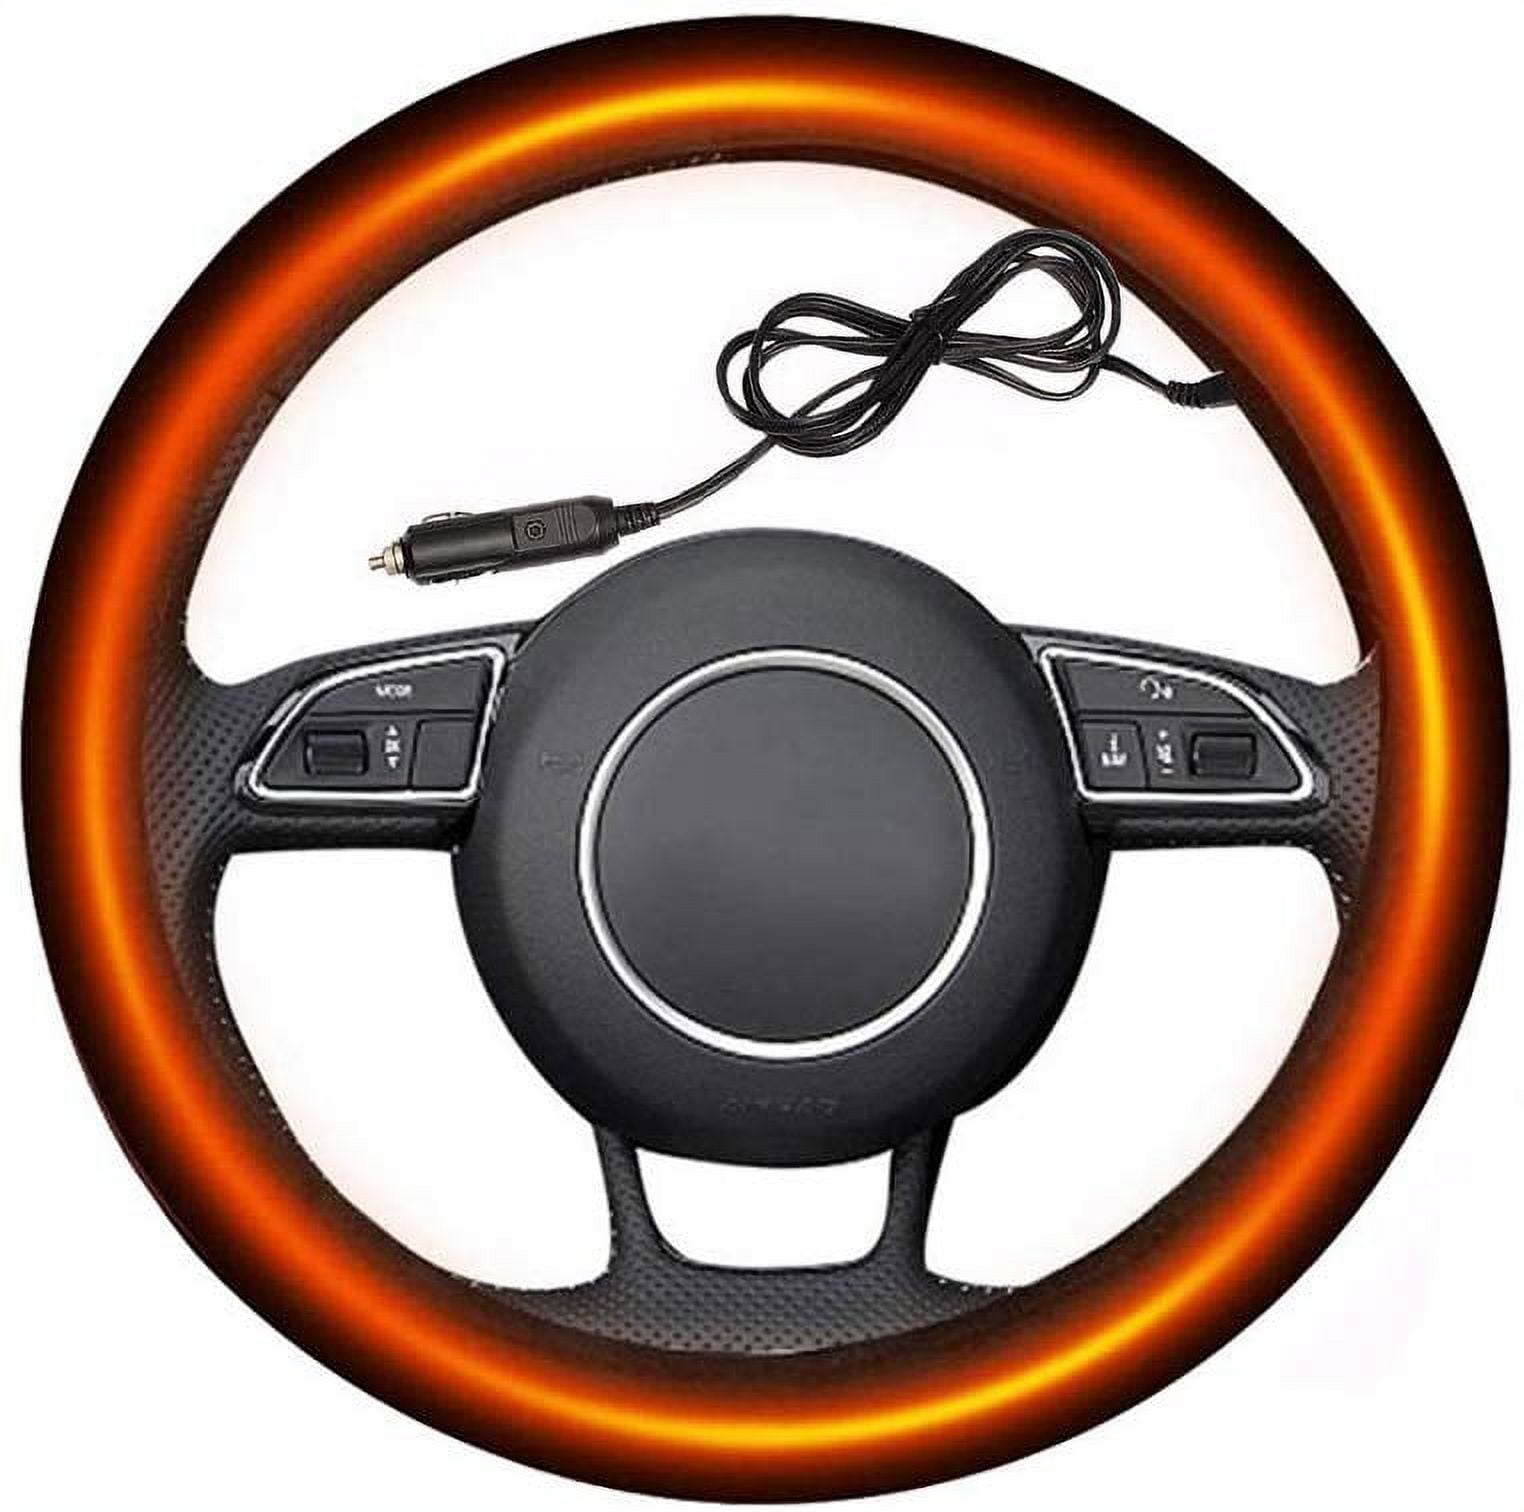 Wholesale steering wheel heater To Cover Up Wear And Tear In A Car